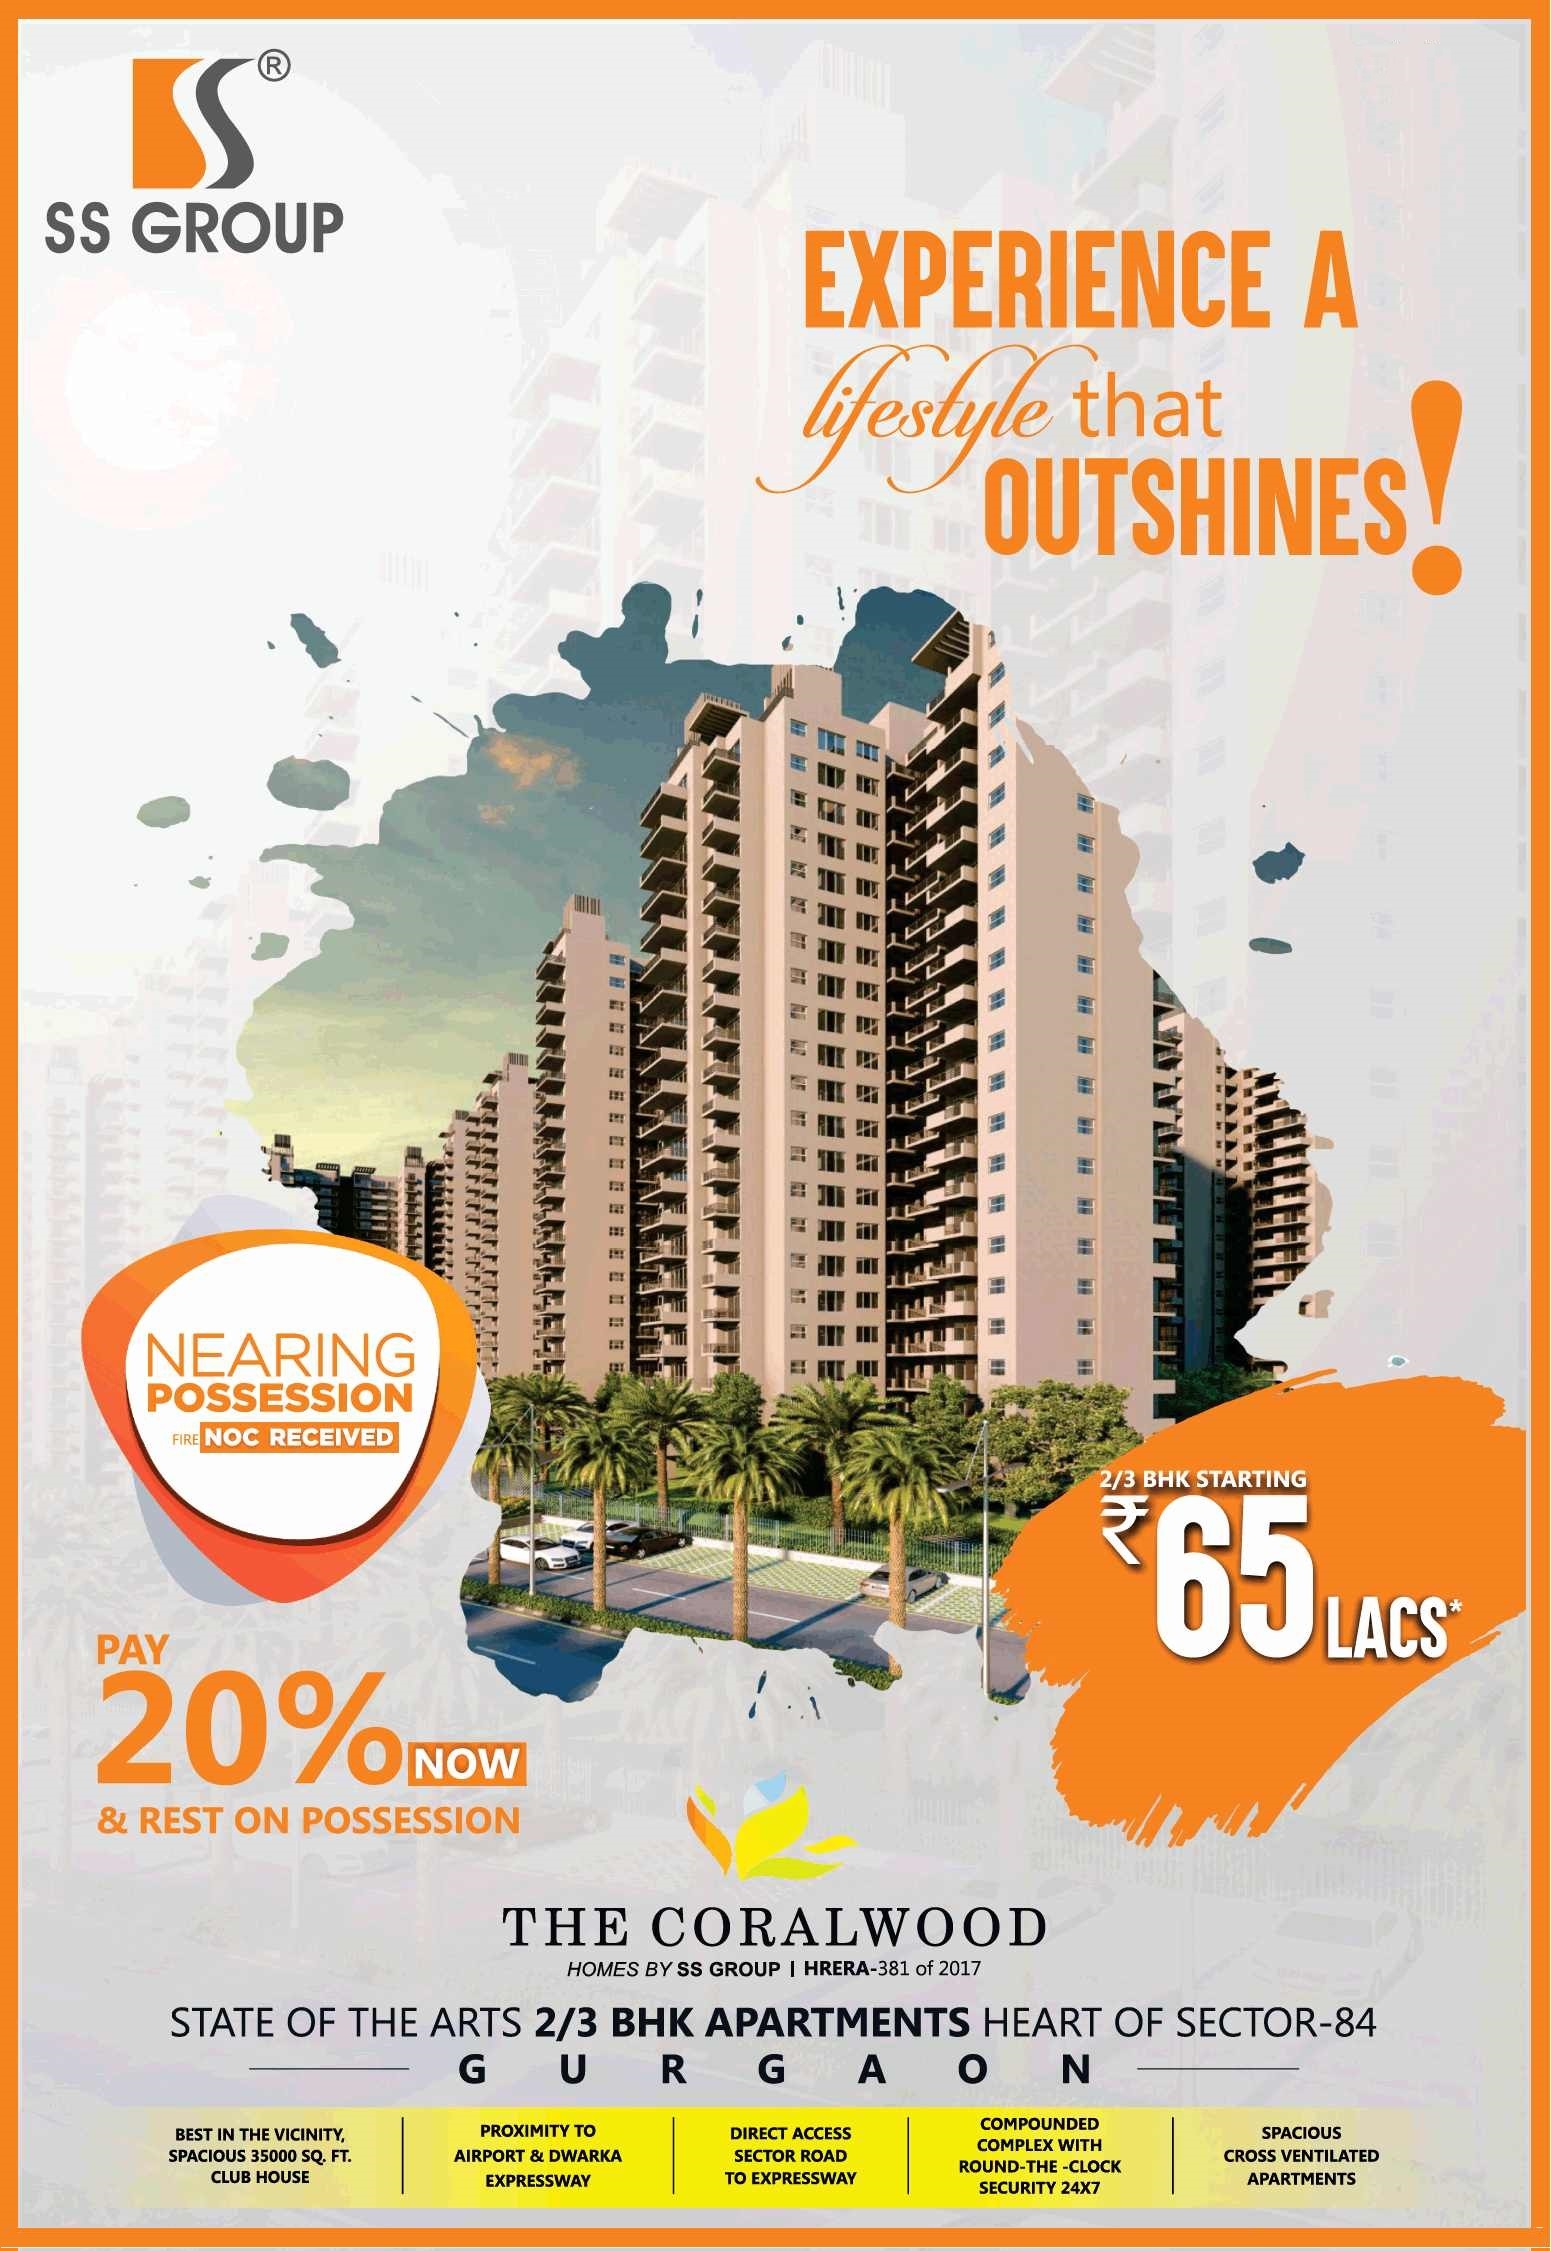 Pay 20% now & rest on possession at SS The Coralwood in Gurgaon Update